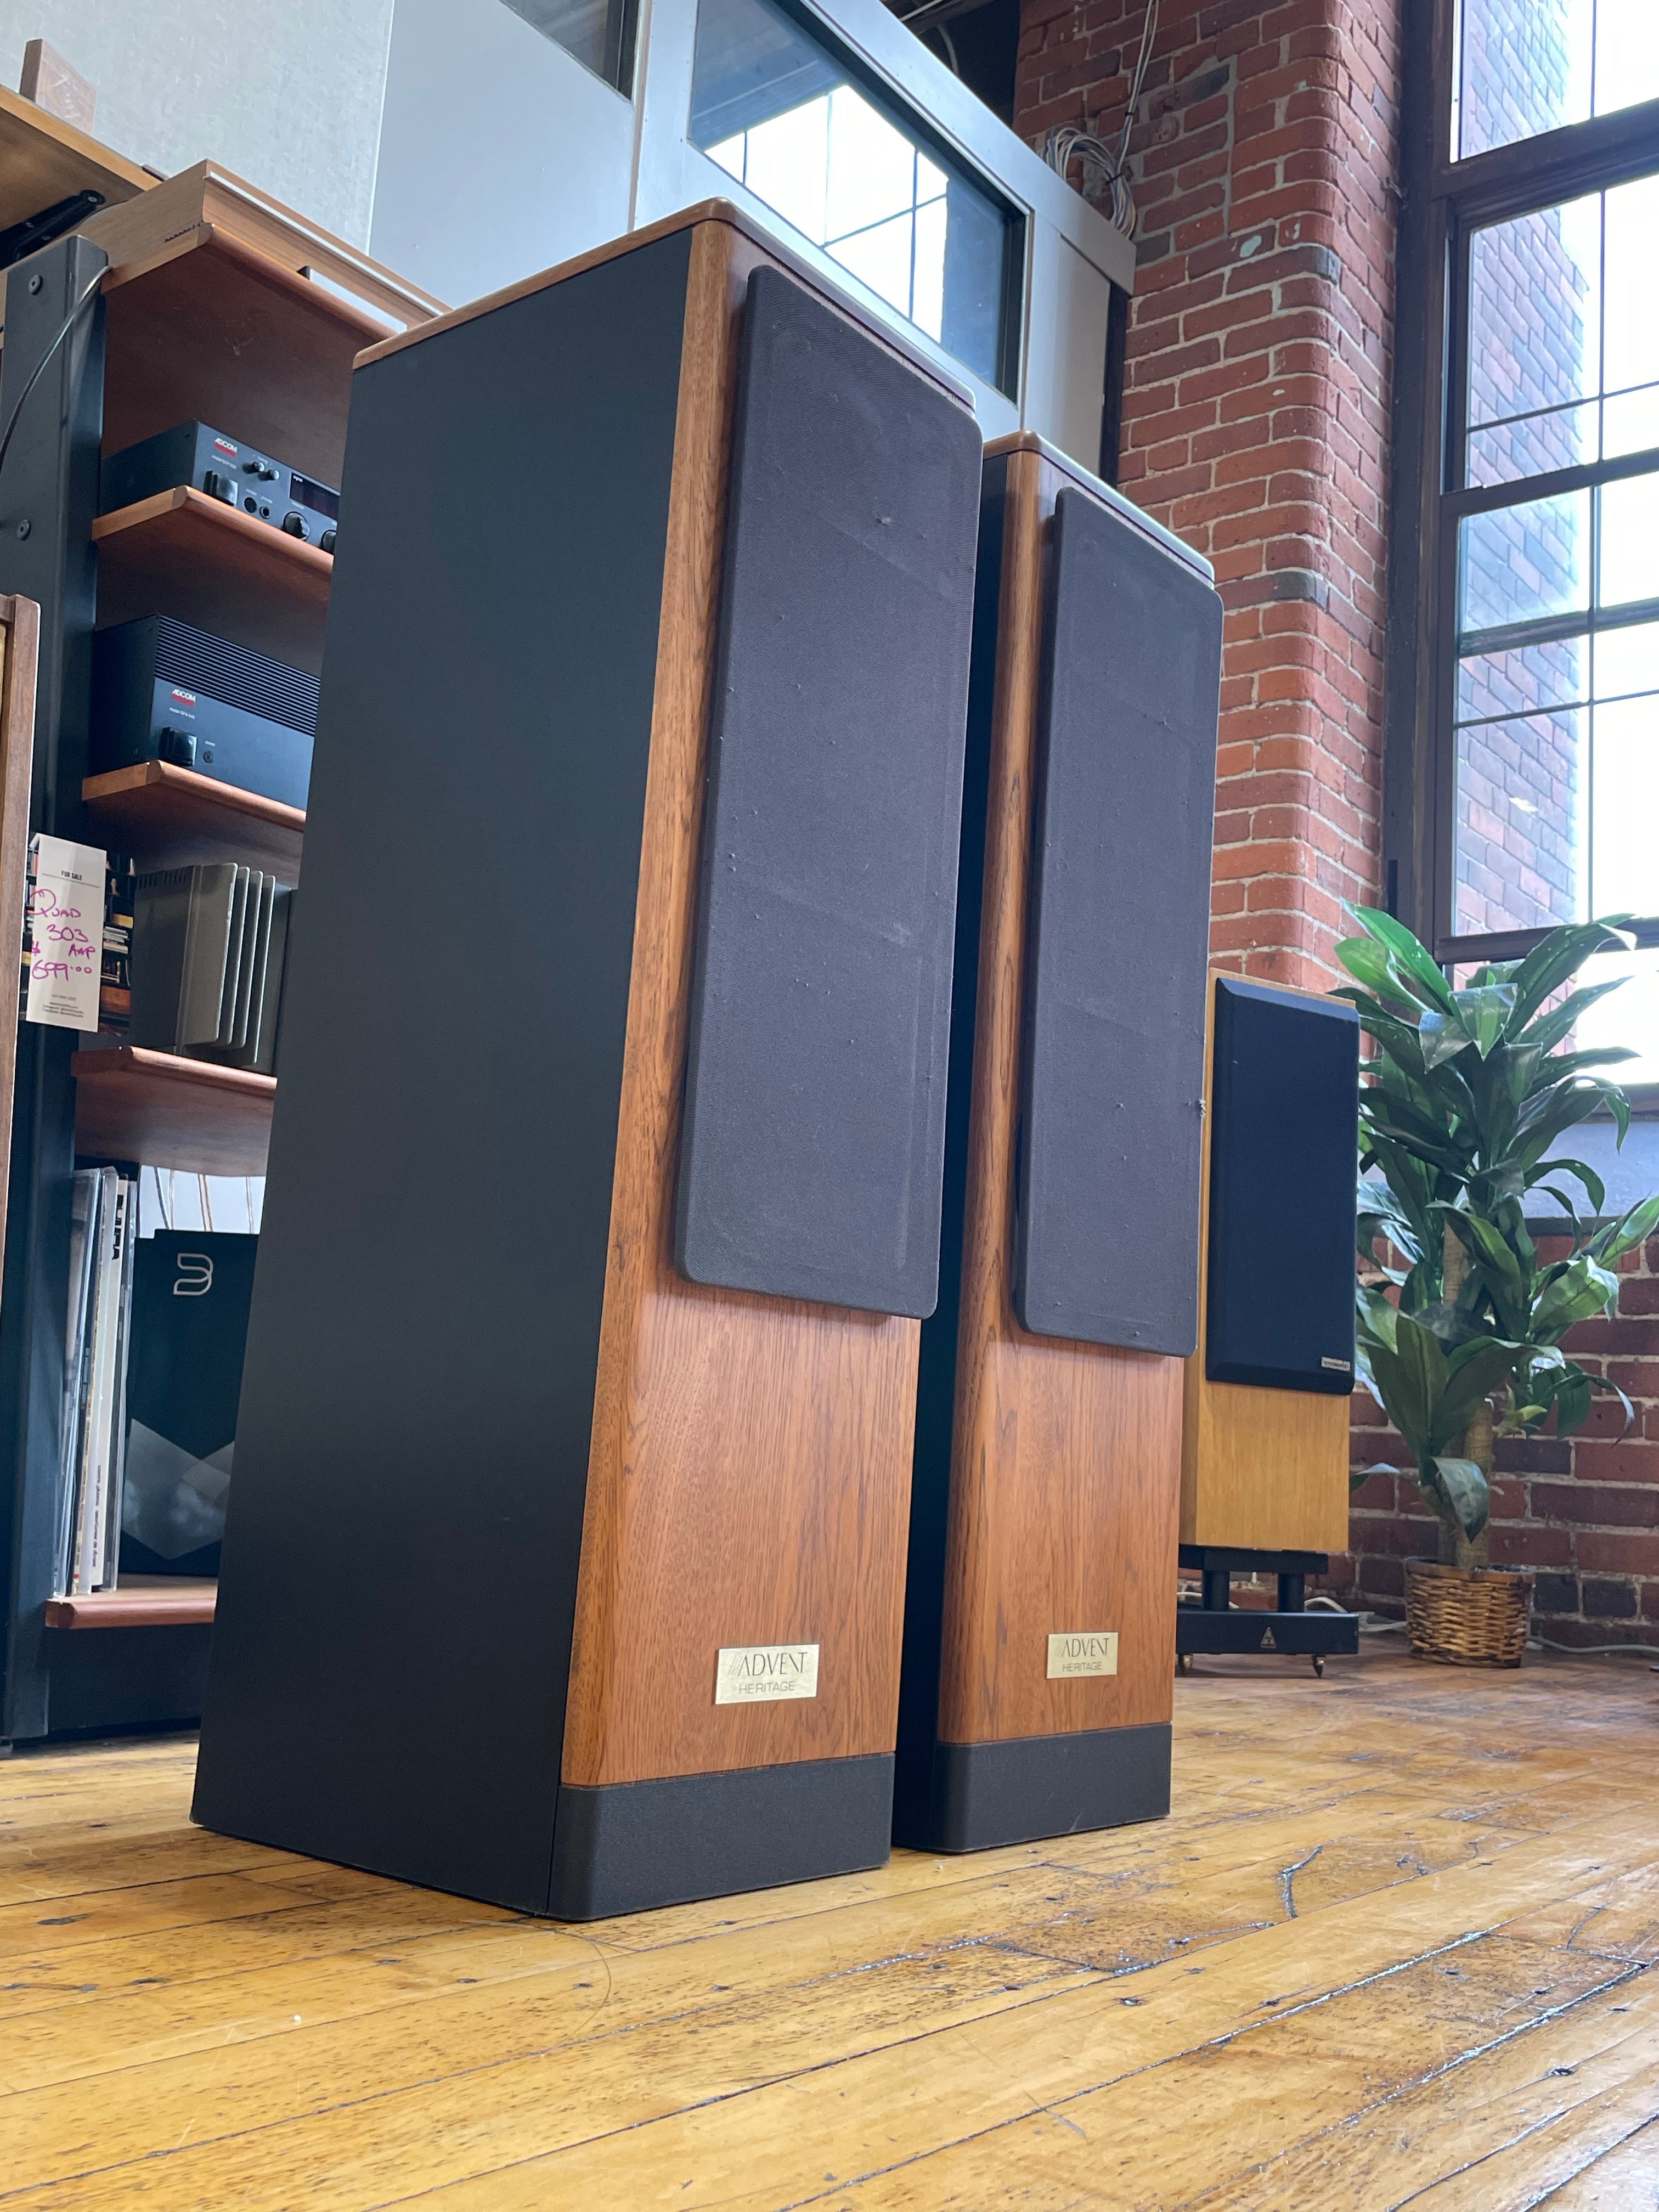 Advent Heritage Tower Speakers - SOLD